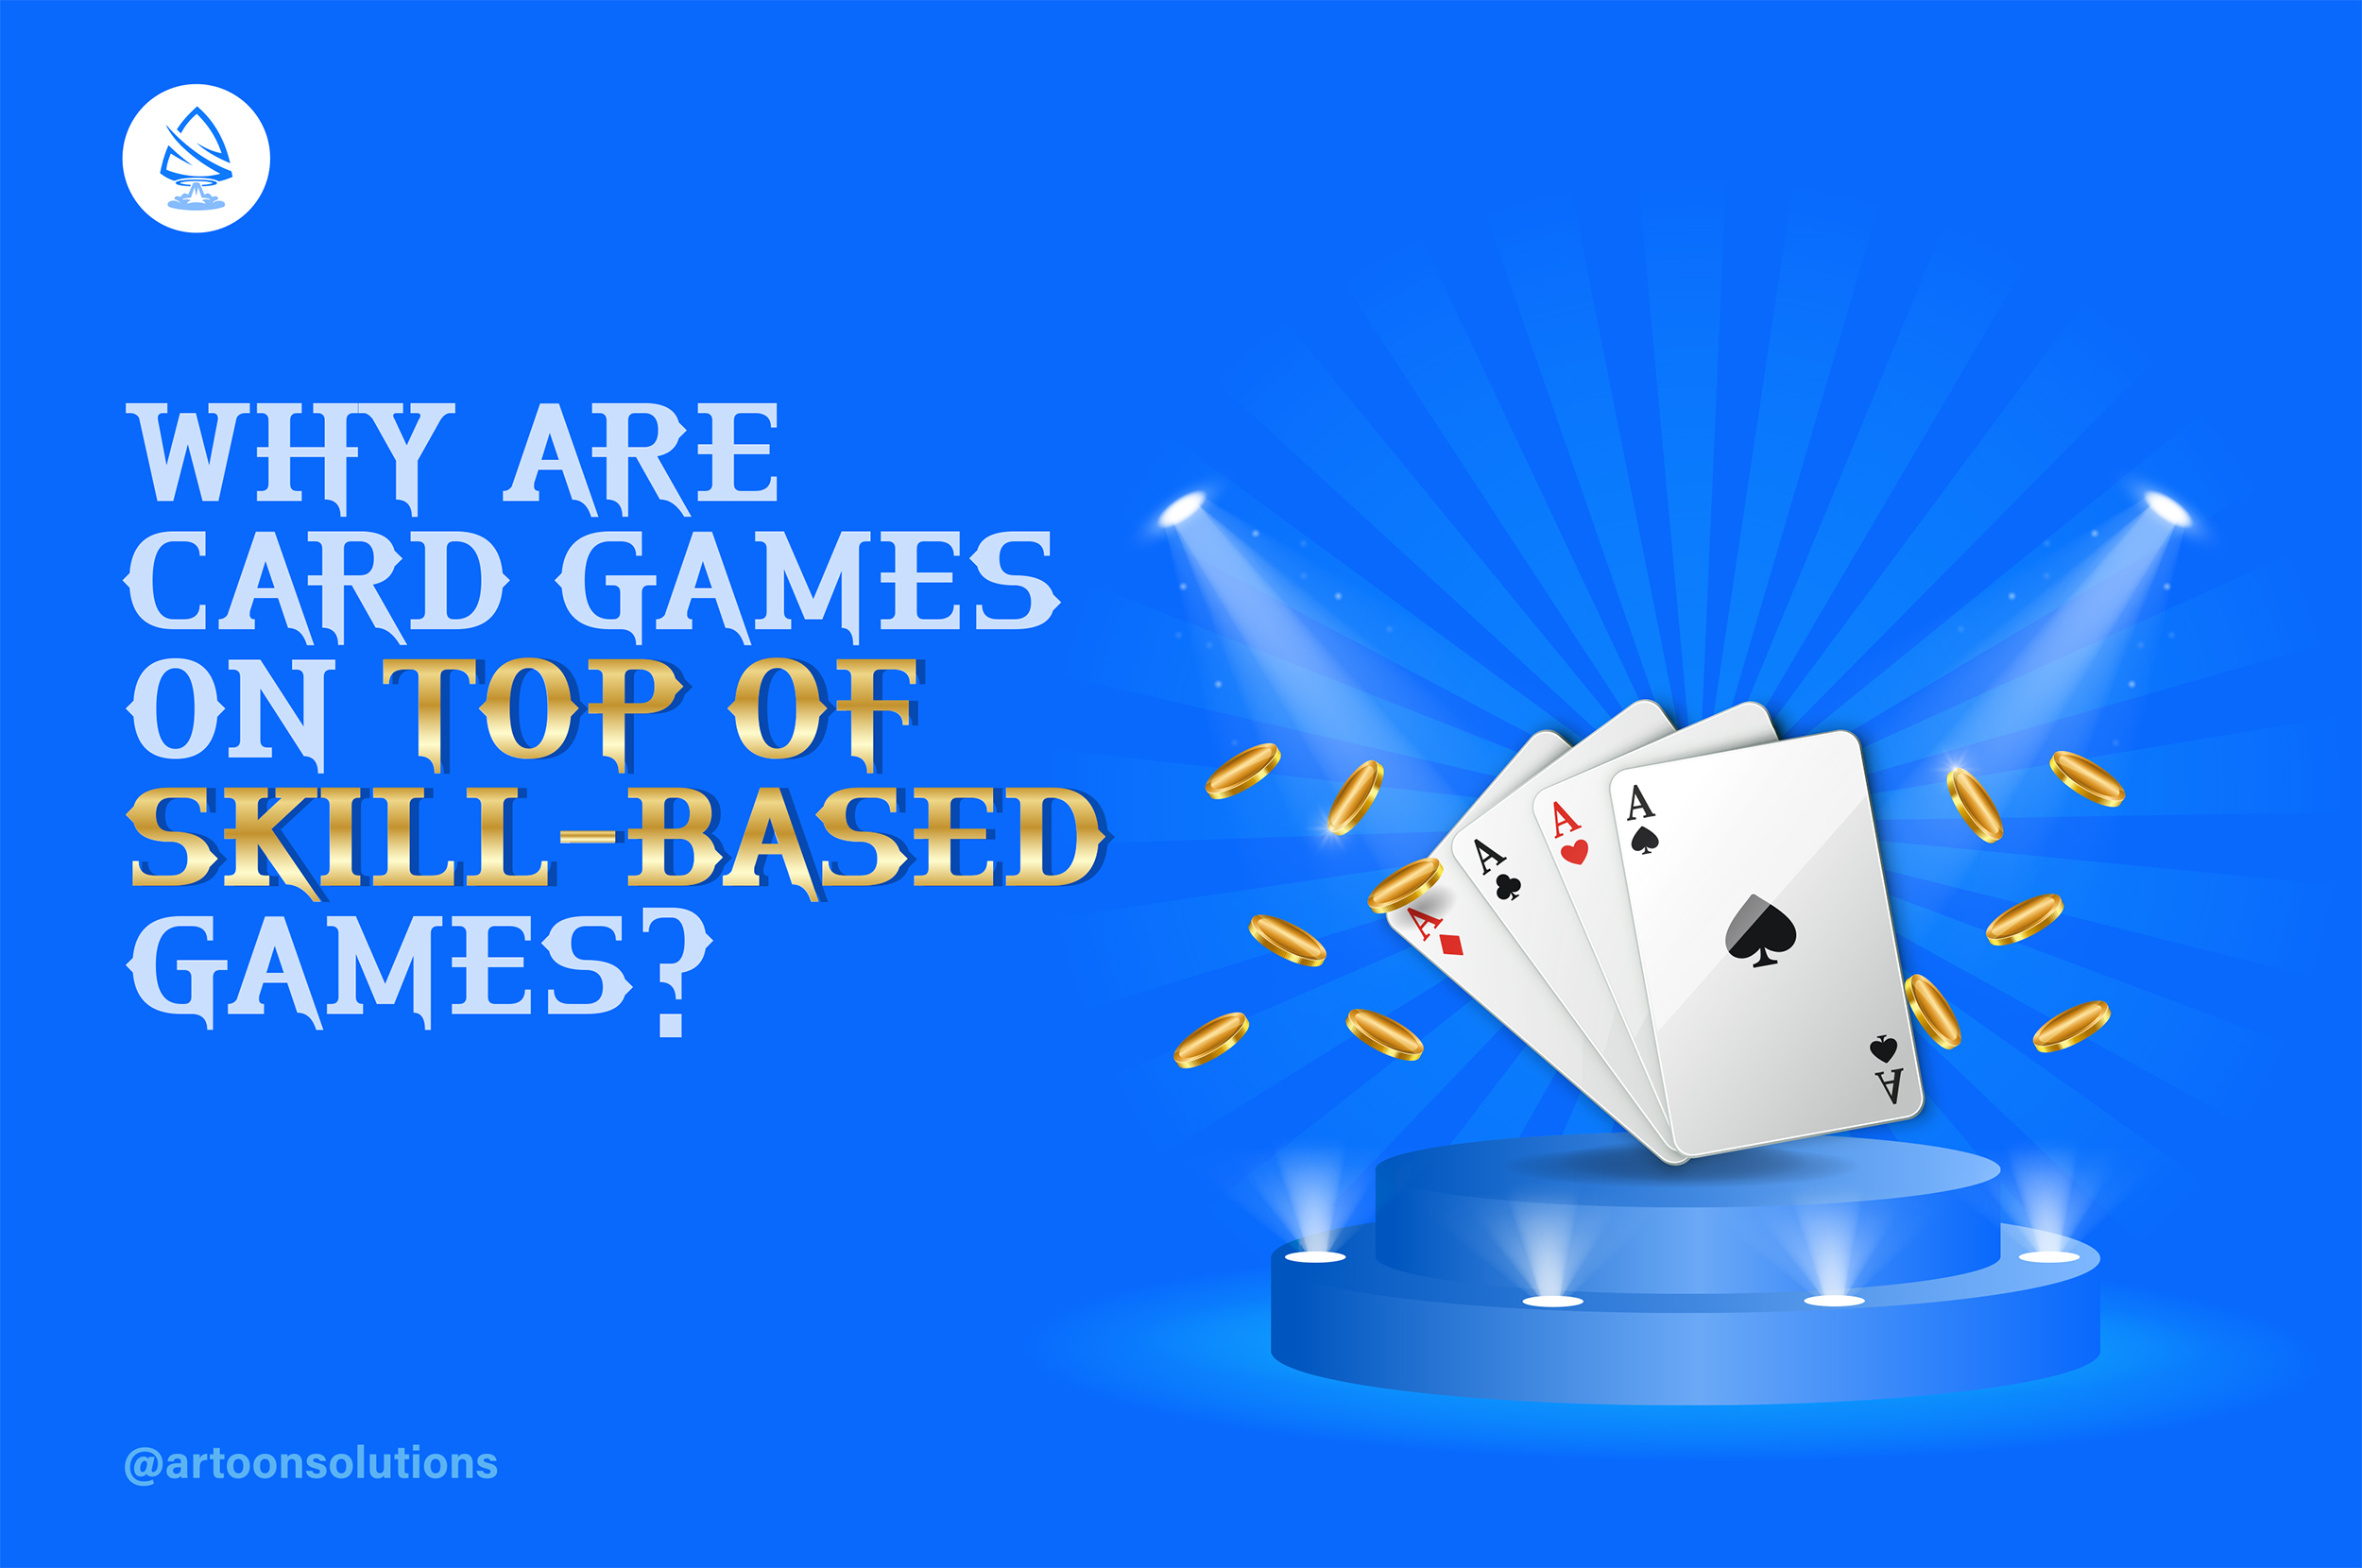 Skill-based card games are the most popular games in India as well as globally. People always like to play card games in their leisure time, to socialize with friends, and some play for earning purposes as well.